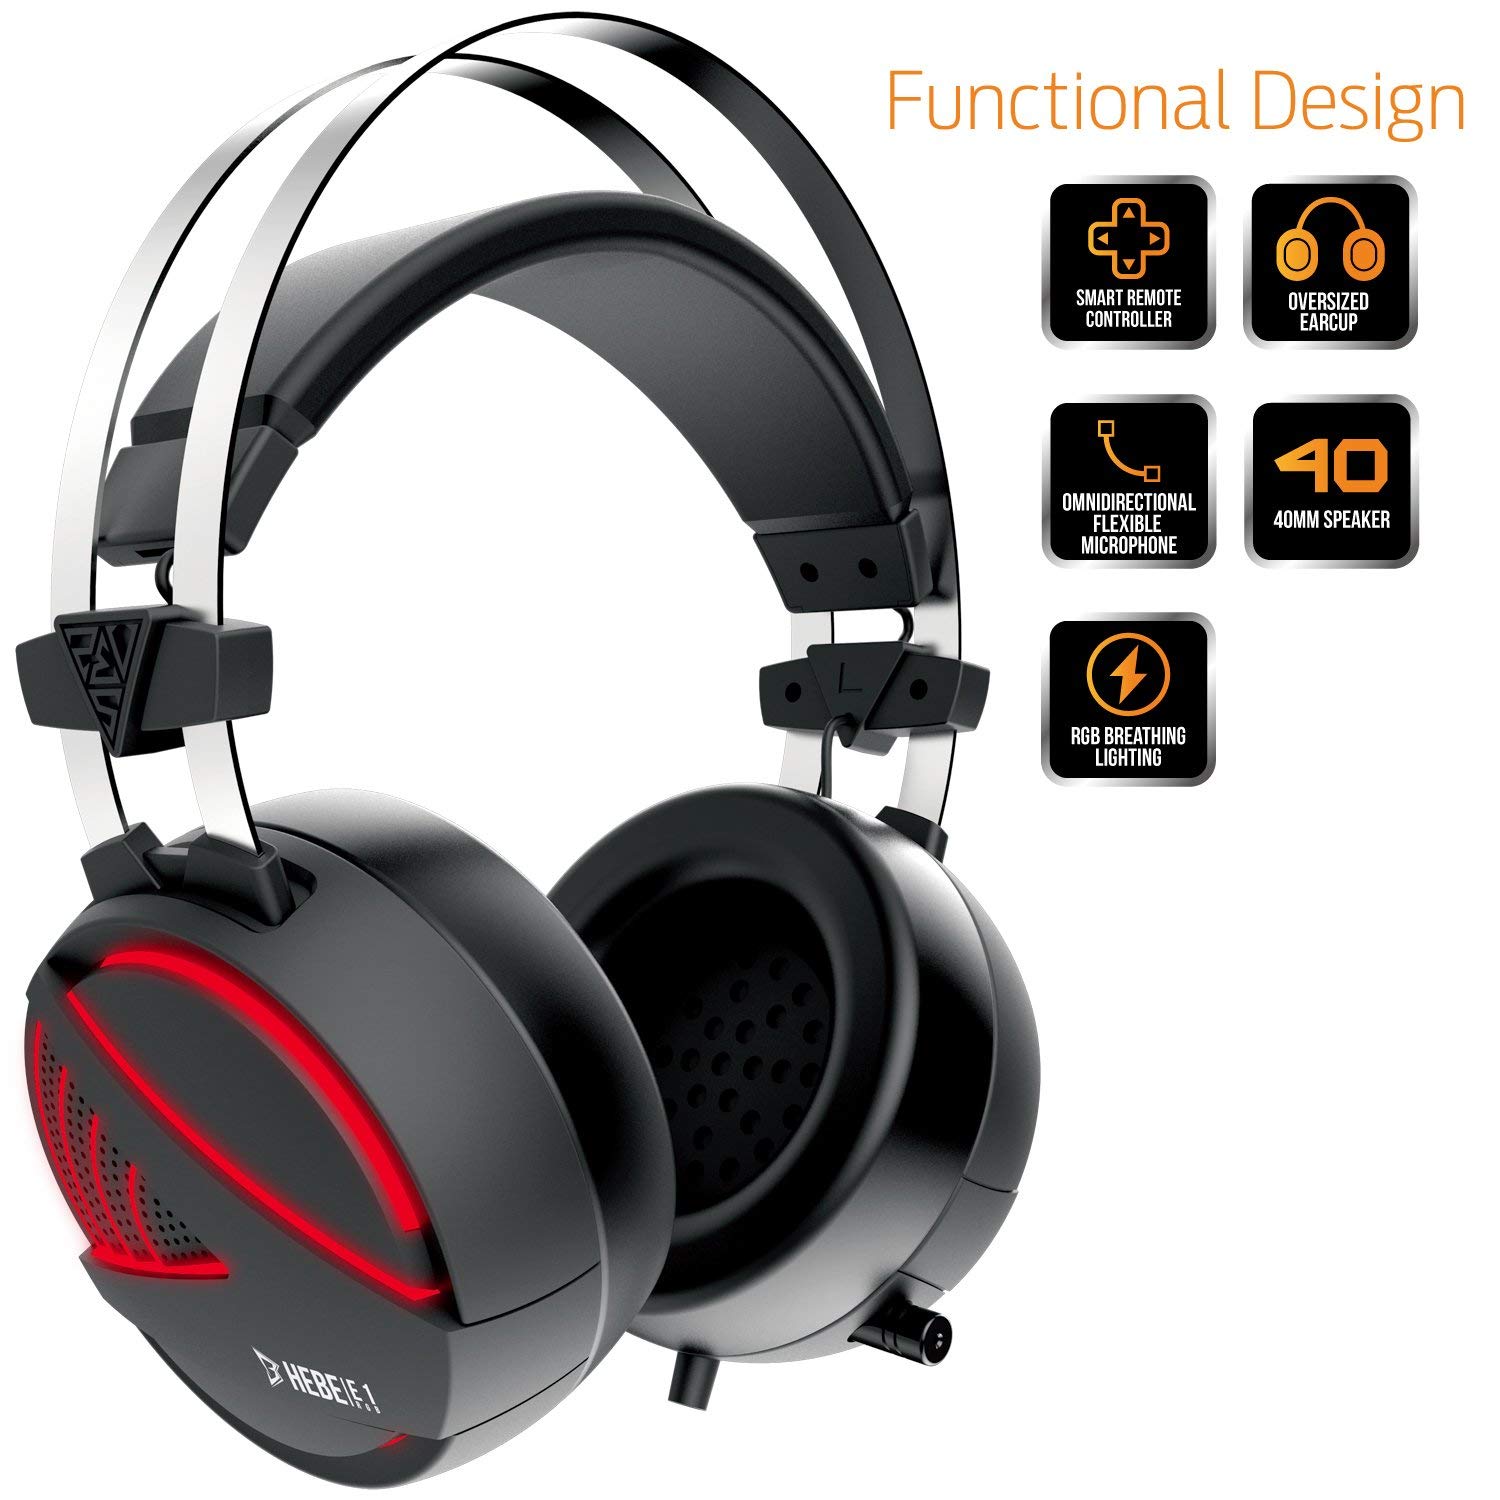 GAMDIAS Gaming Headset with USB/3.5mm Jack, 40mm Drivers, In-line Remote and RGB Lighting (HEBE E1)